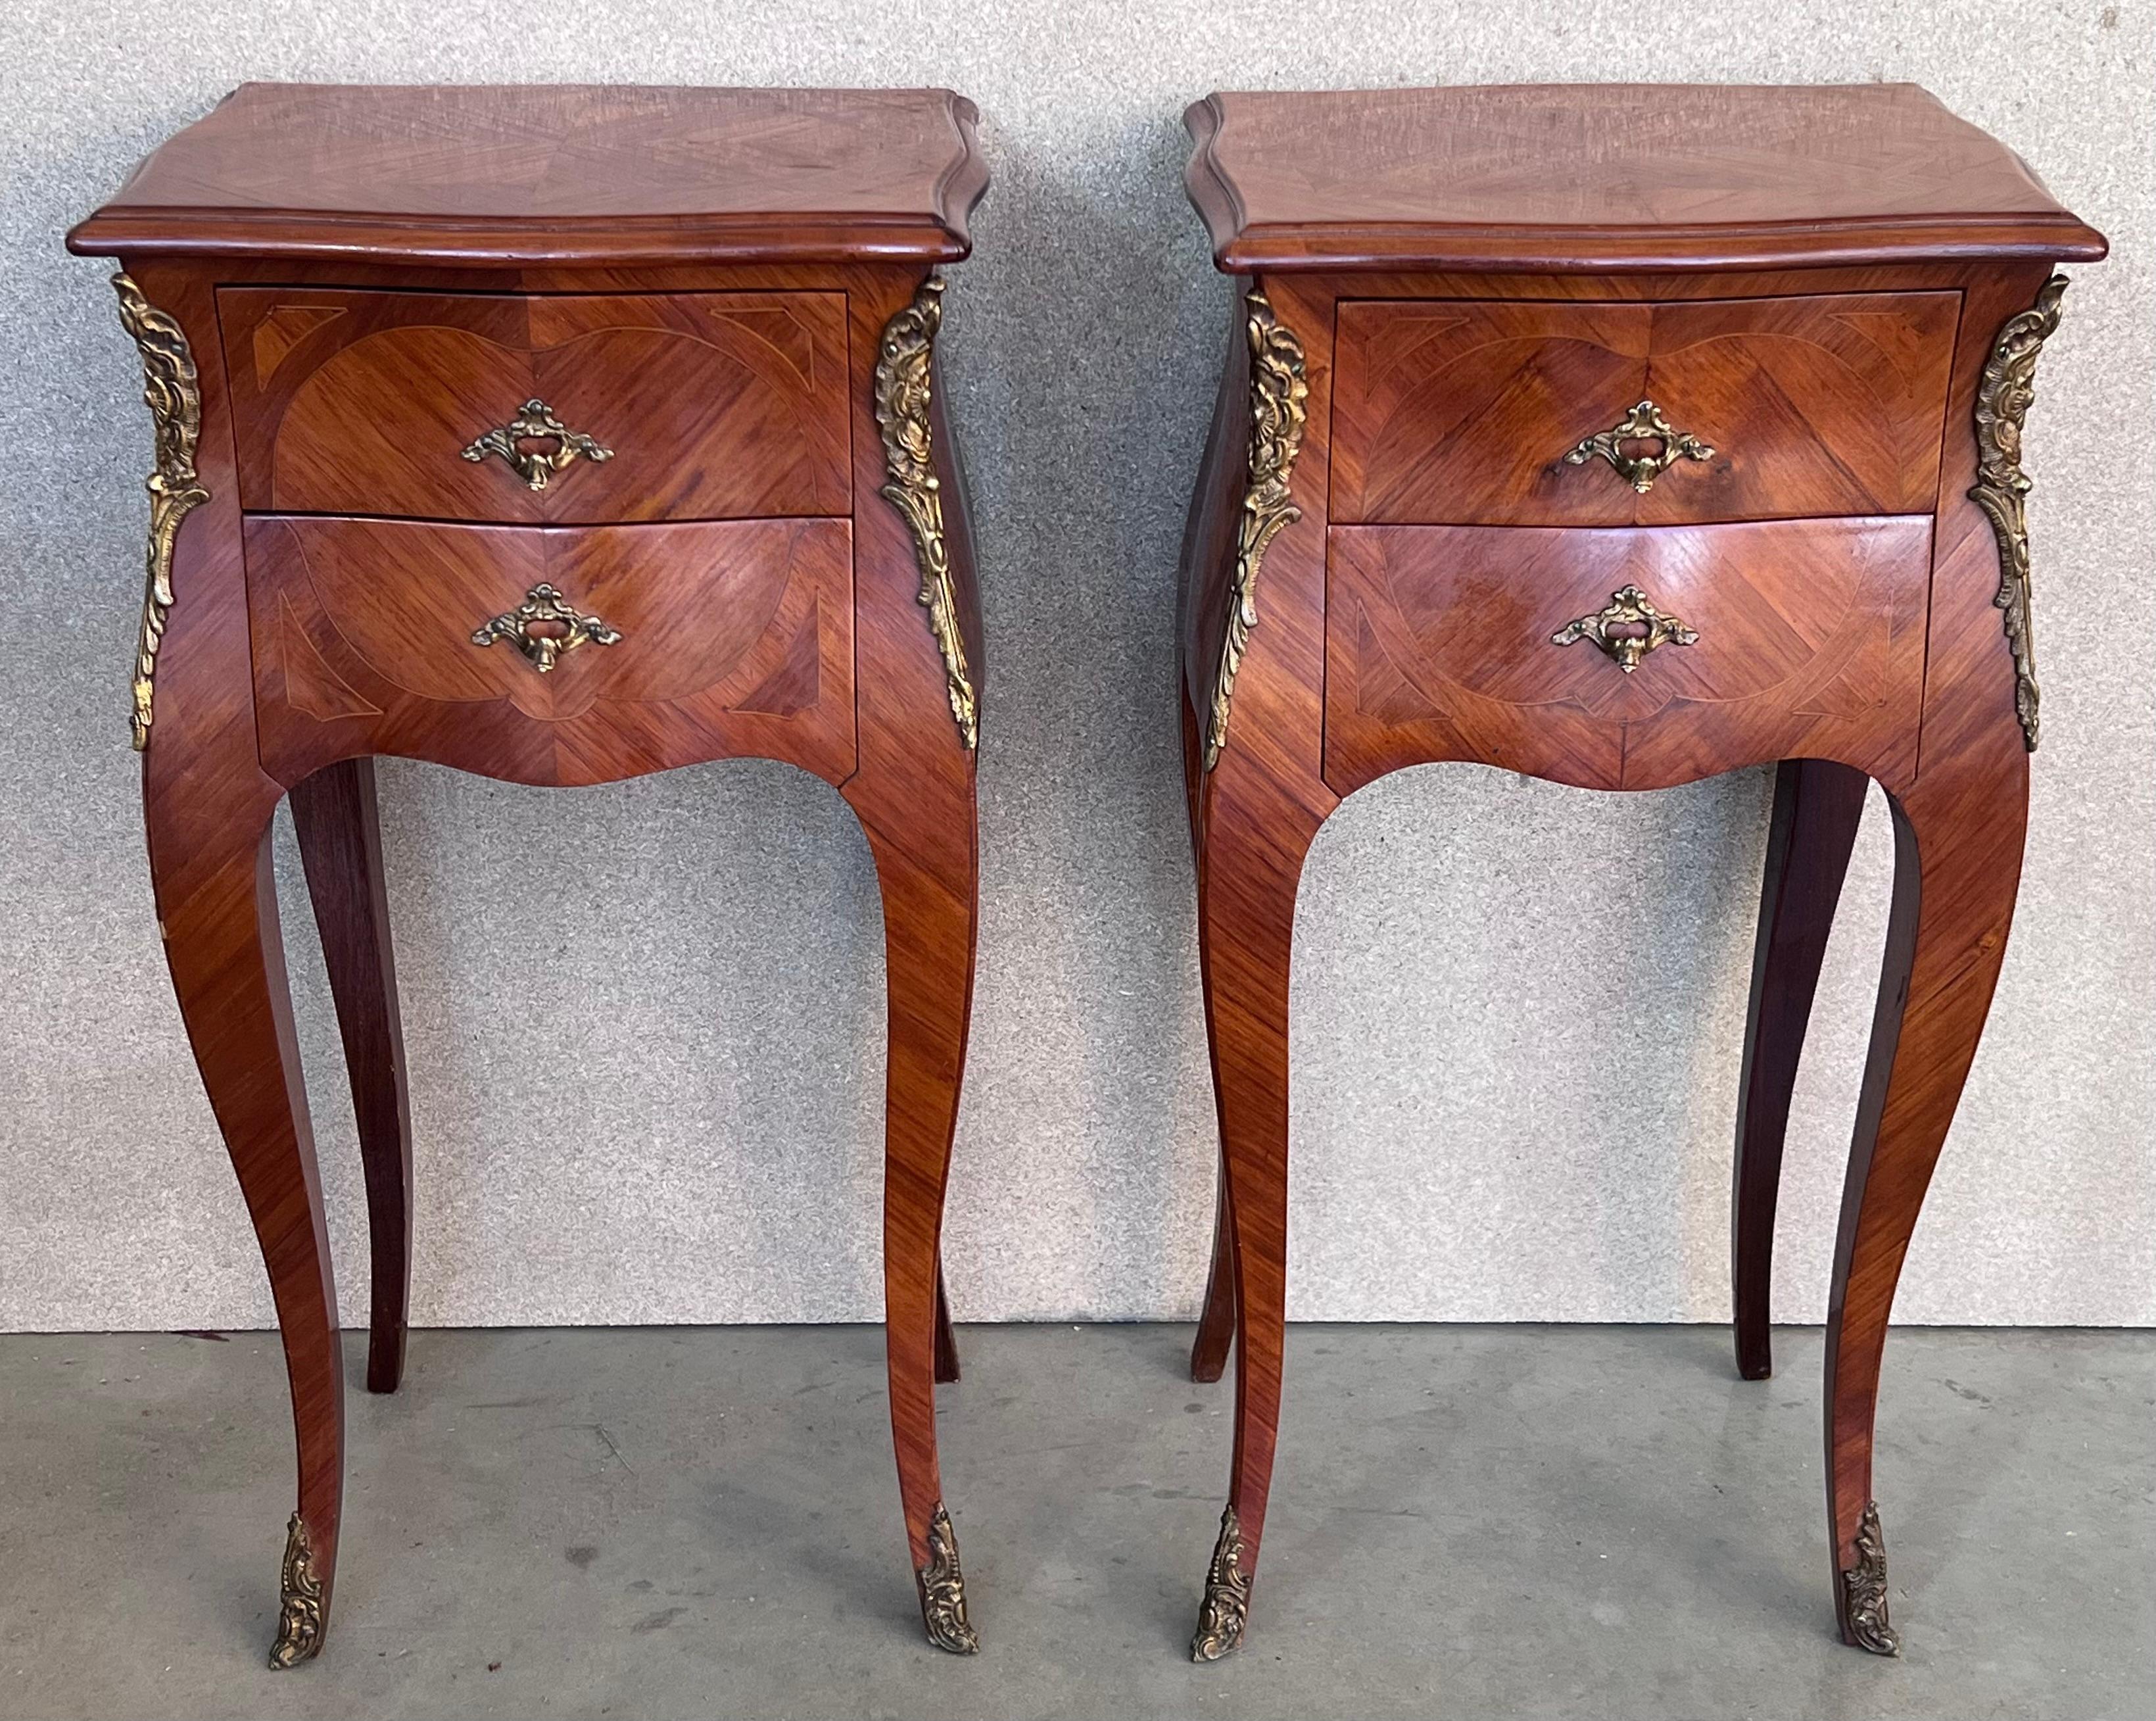 A pair of Antique French Louis XV Marquetry marble top nightstands. Subtle contours and scroll shapes are evident in the corner posts and legs, which support serpentine sides and an arched front façade for a curvaceous effect. The tops are luxurious